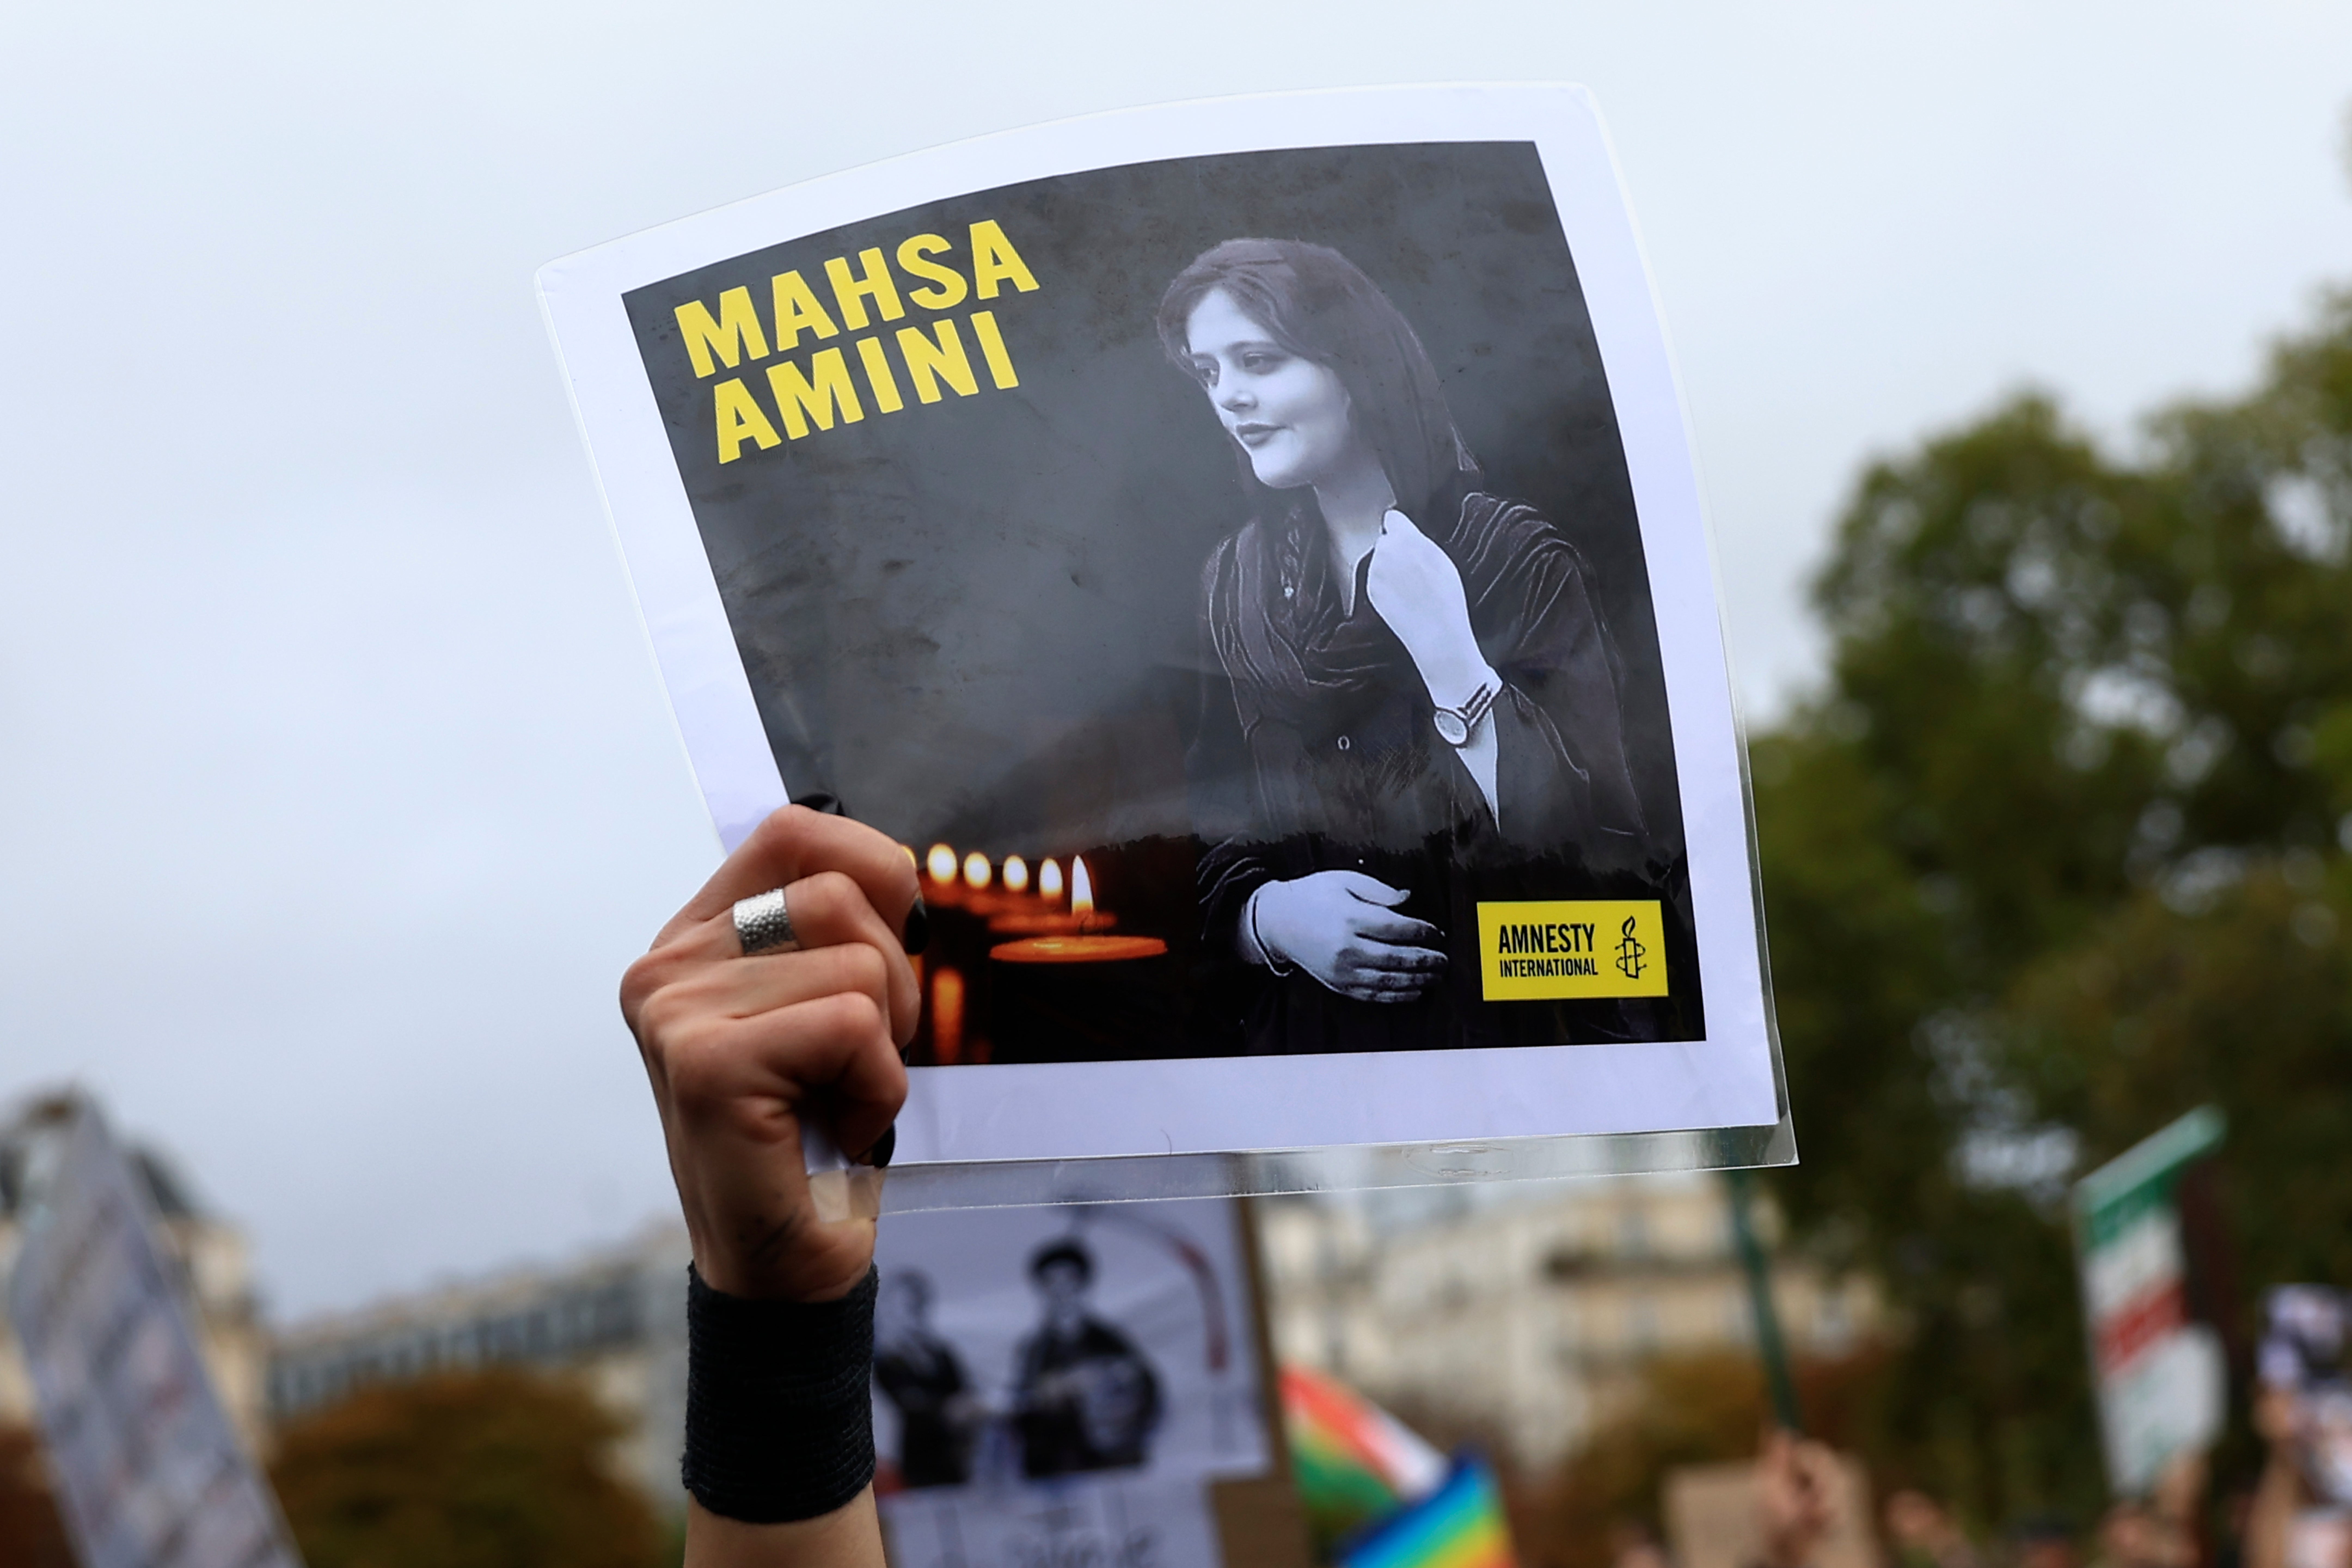 Protests have spread to many cities outside Iran, with a march in Paris on Sunday attracting several thousand people